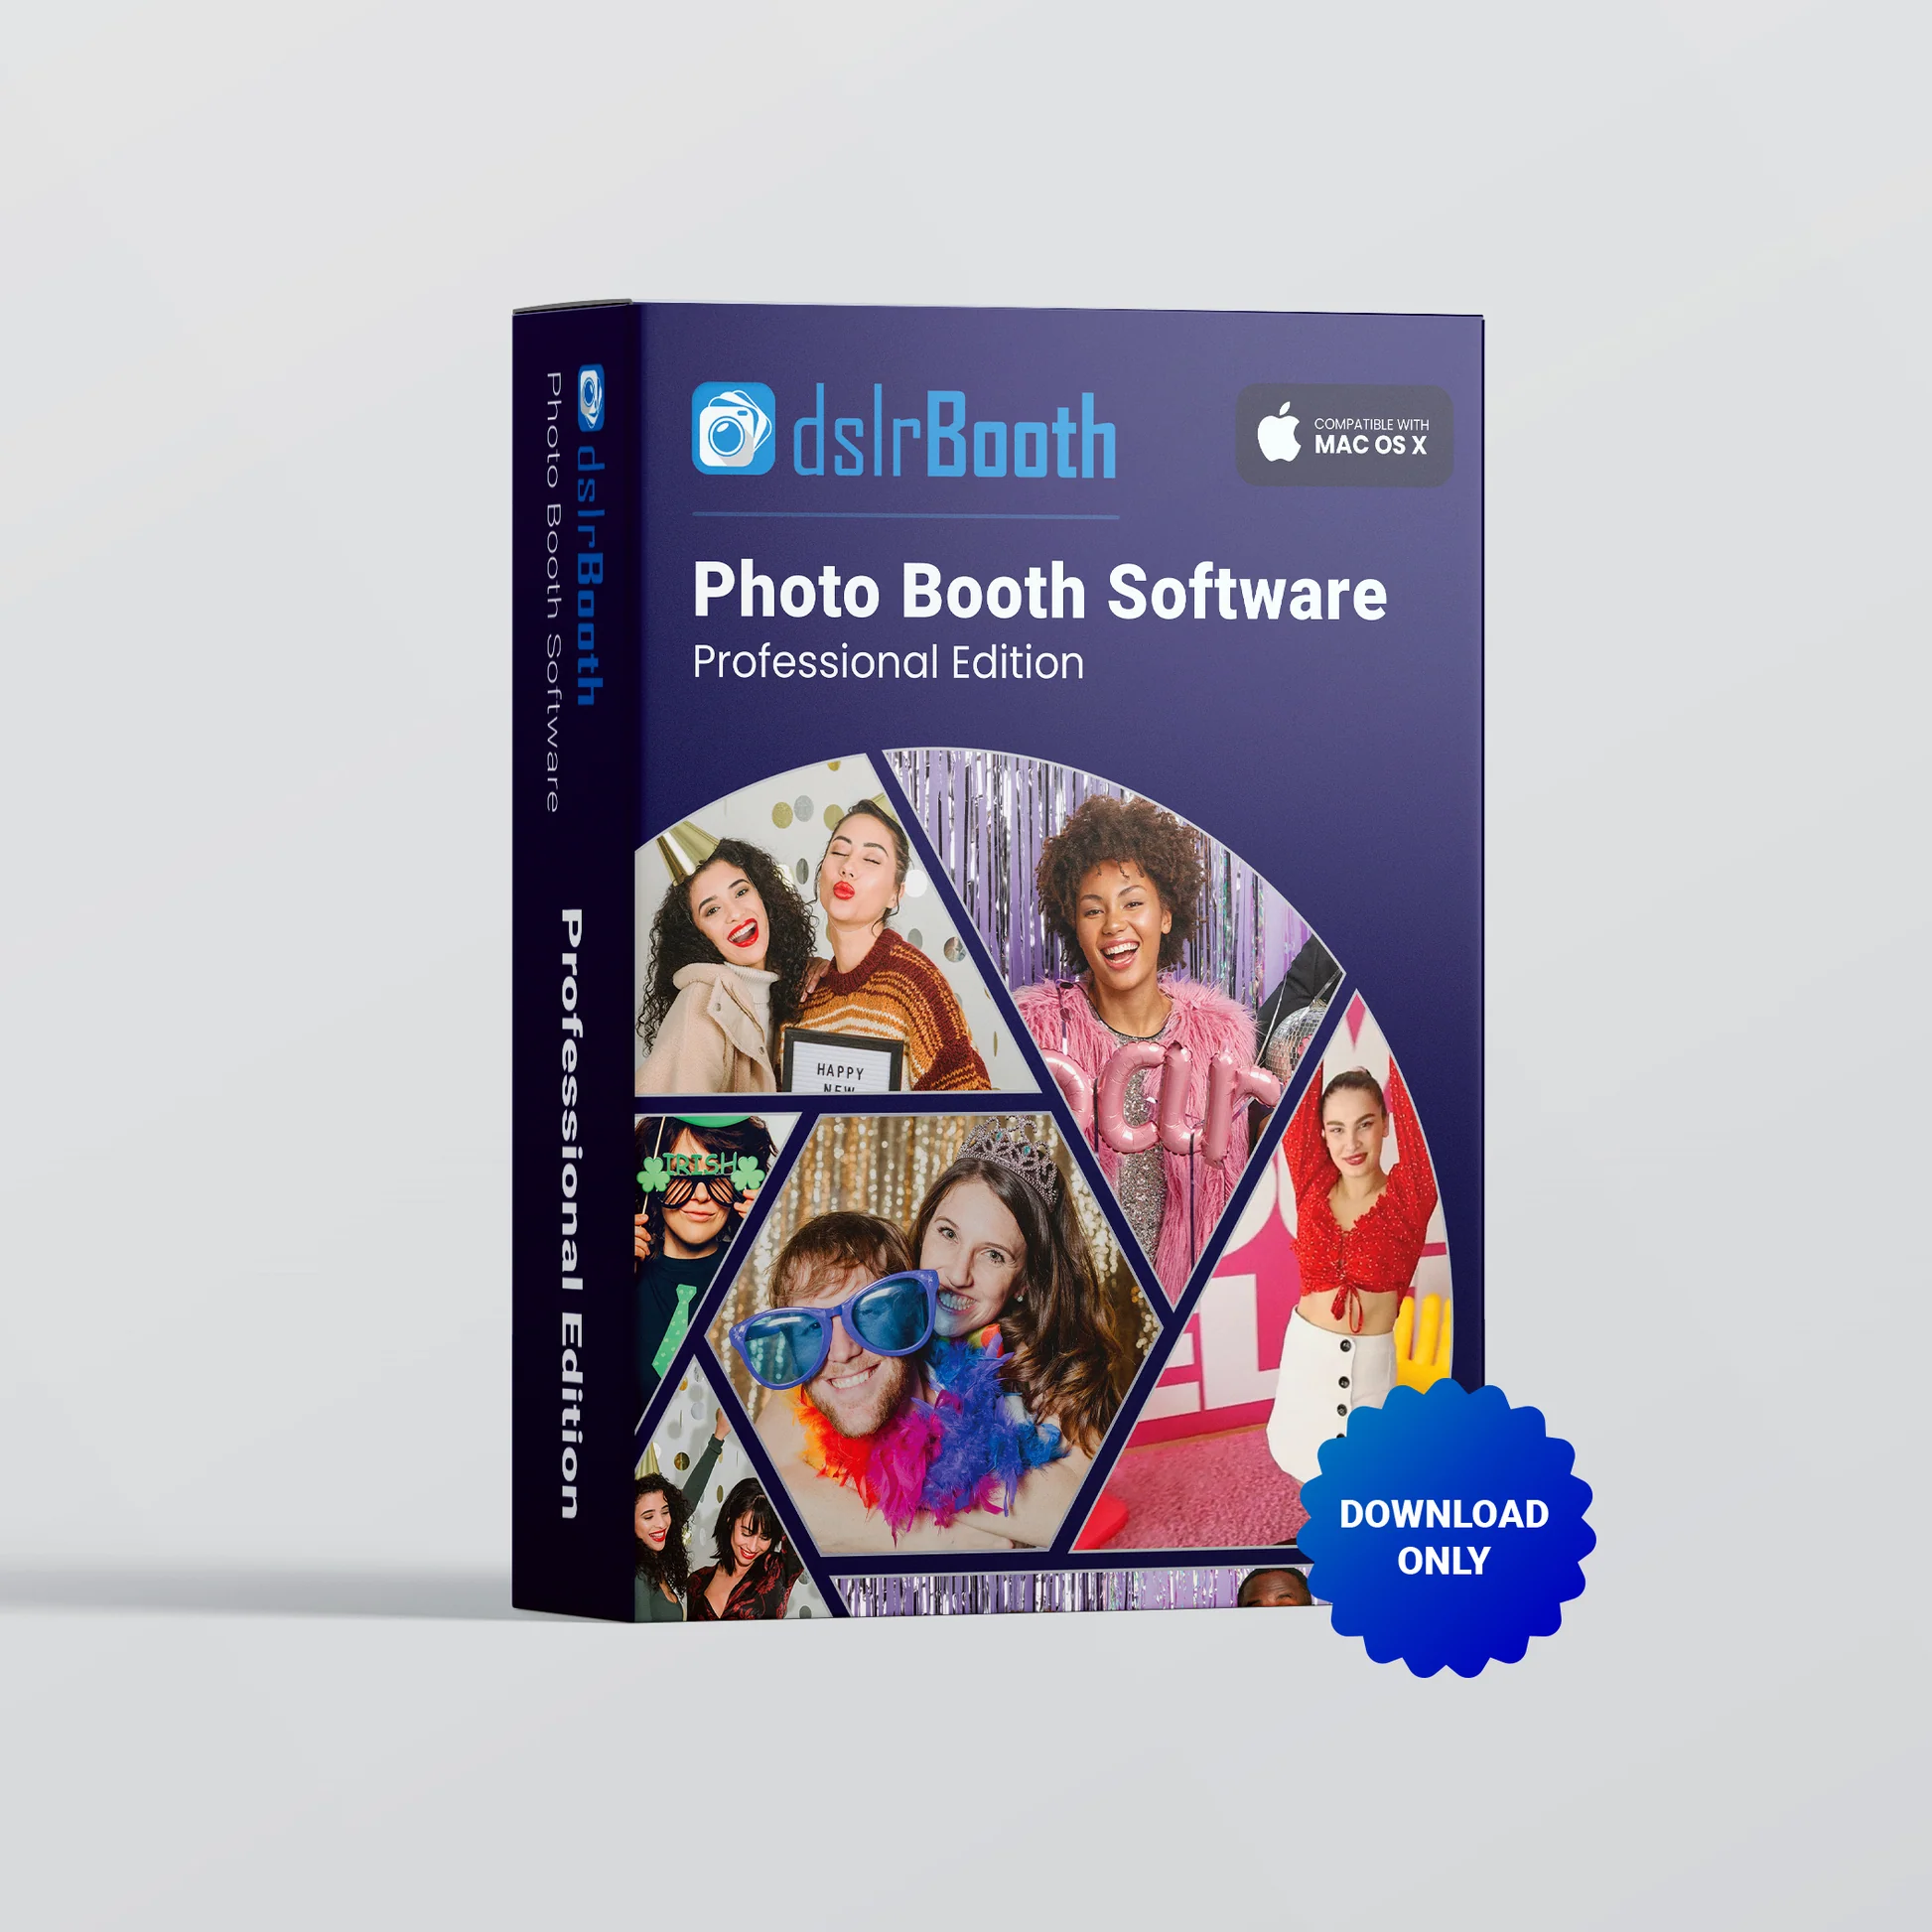 Professional edition of dslrBooth photo booth software for high-quality images and seamless event photography.